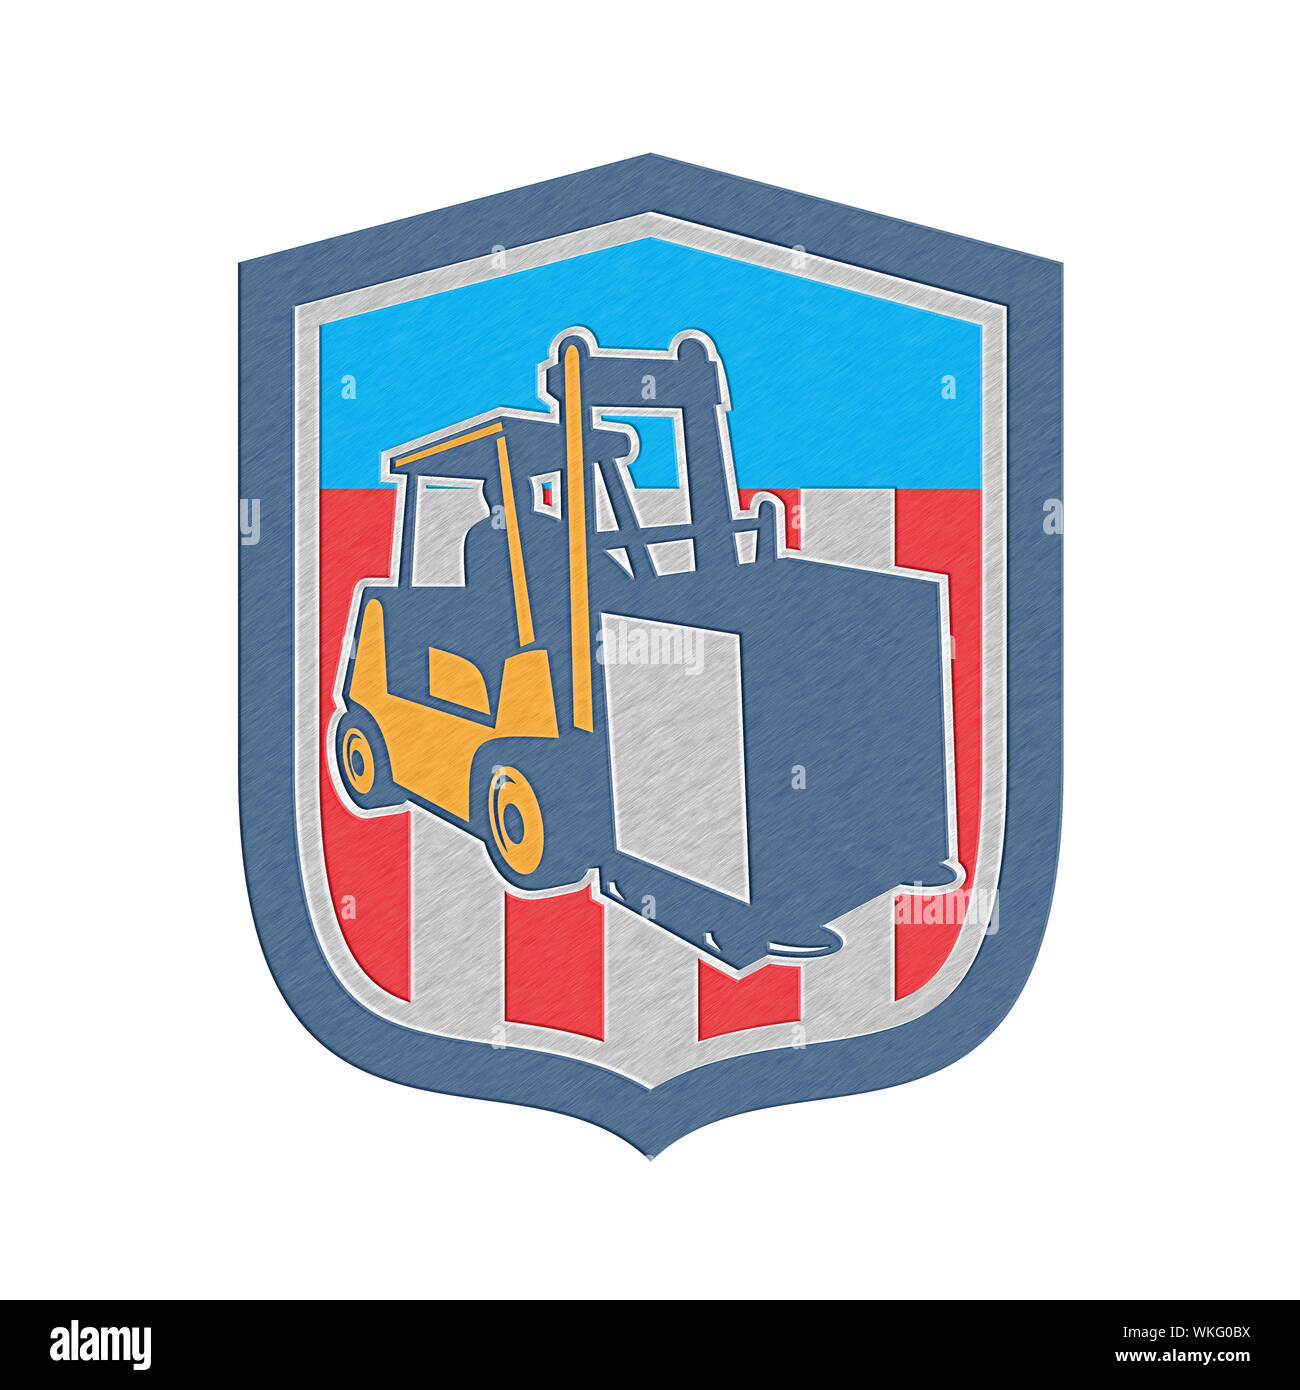 Metallic styled illustration of a forklift truck and driver at work lifting handling box crate done in retro style inside shield crest shape. Stock Photo